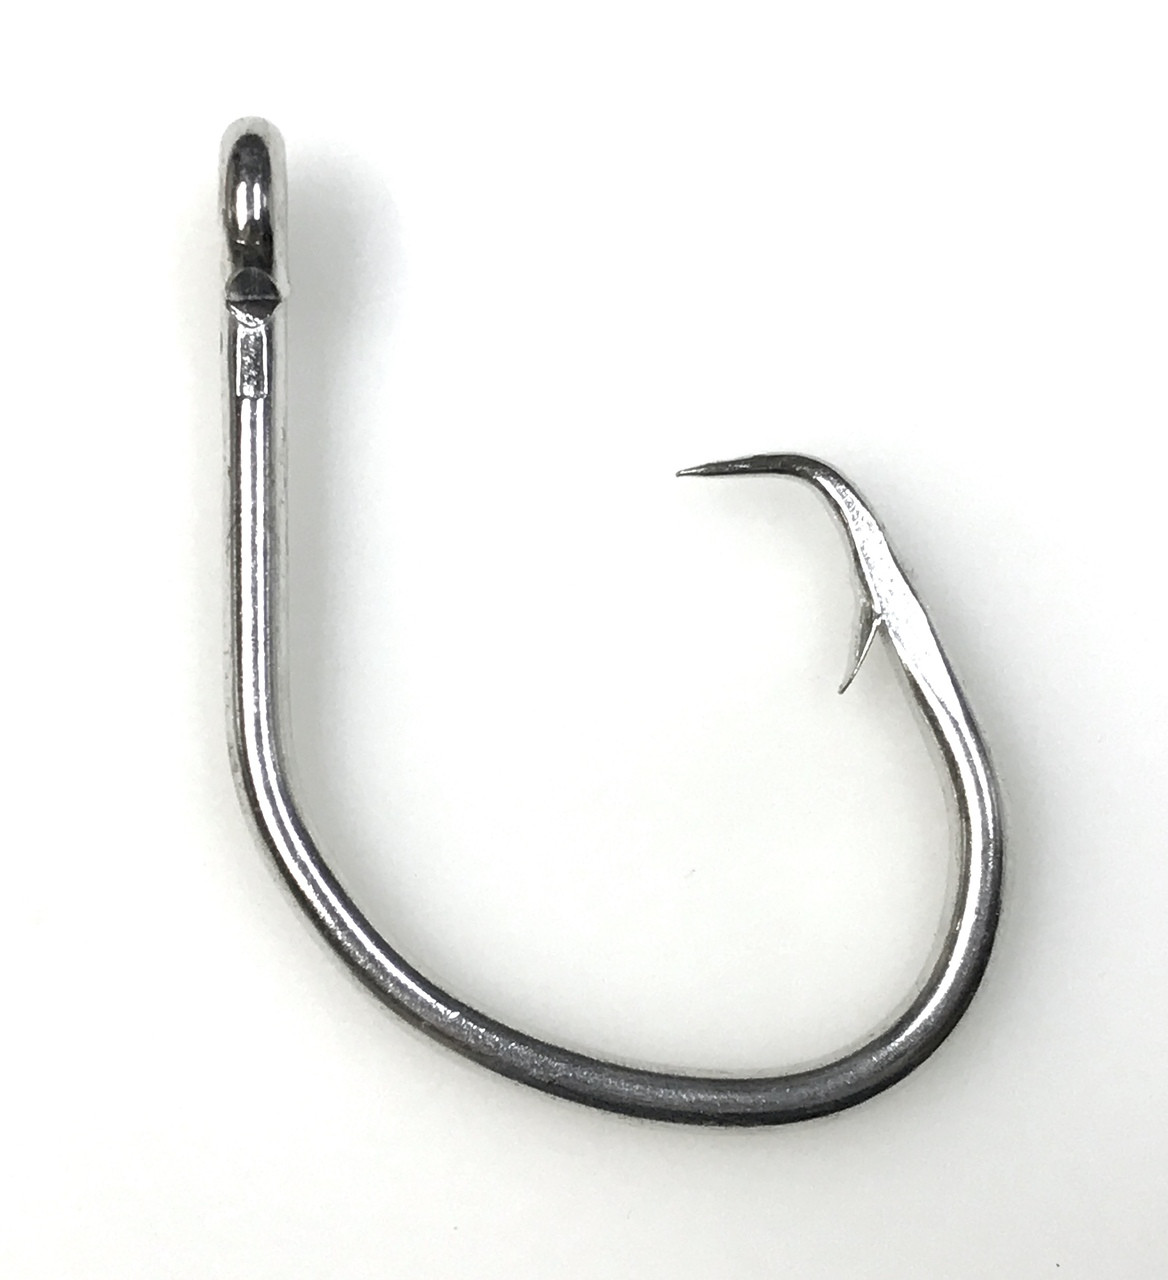 Max-Catch 13/0 Stainless Steel Circle Hooks | Stainless Steel Hook | 13 0  Circle Hooks